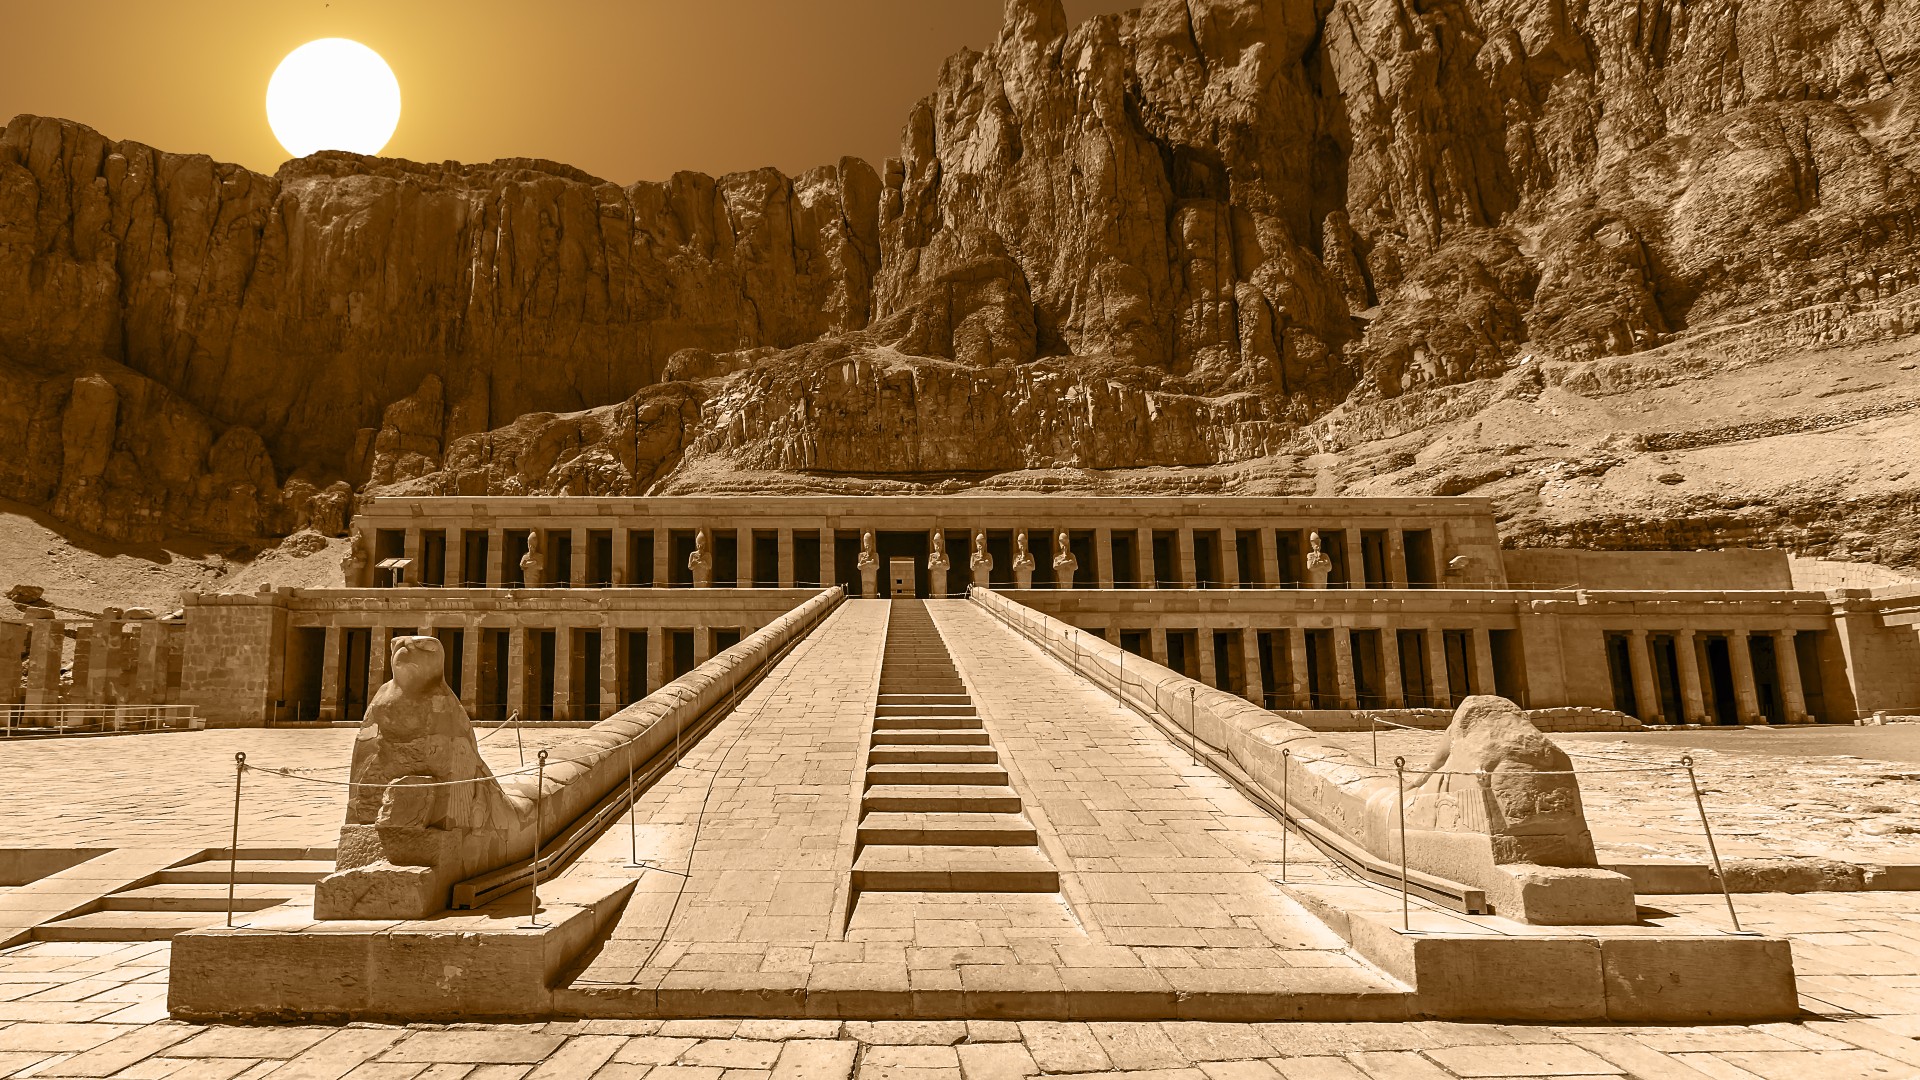 The Mortuary Temple of Hatshepsut at sunrise in Egypt.